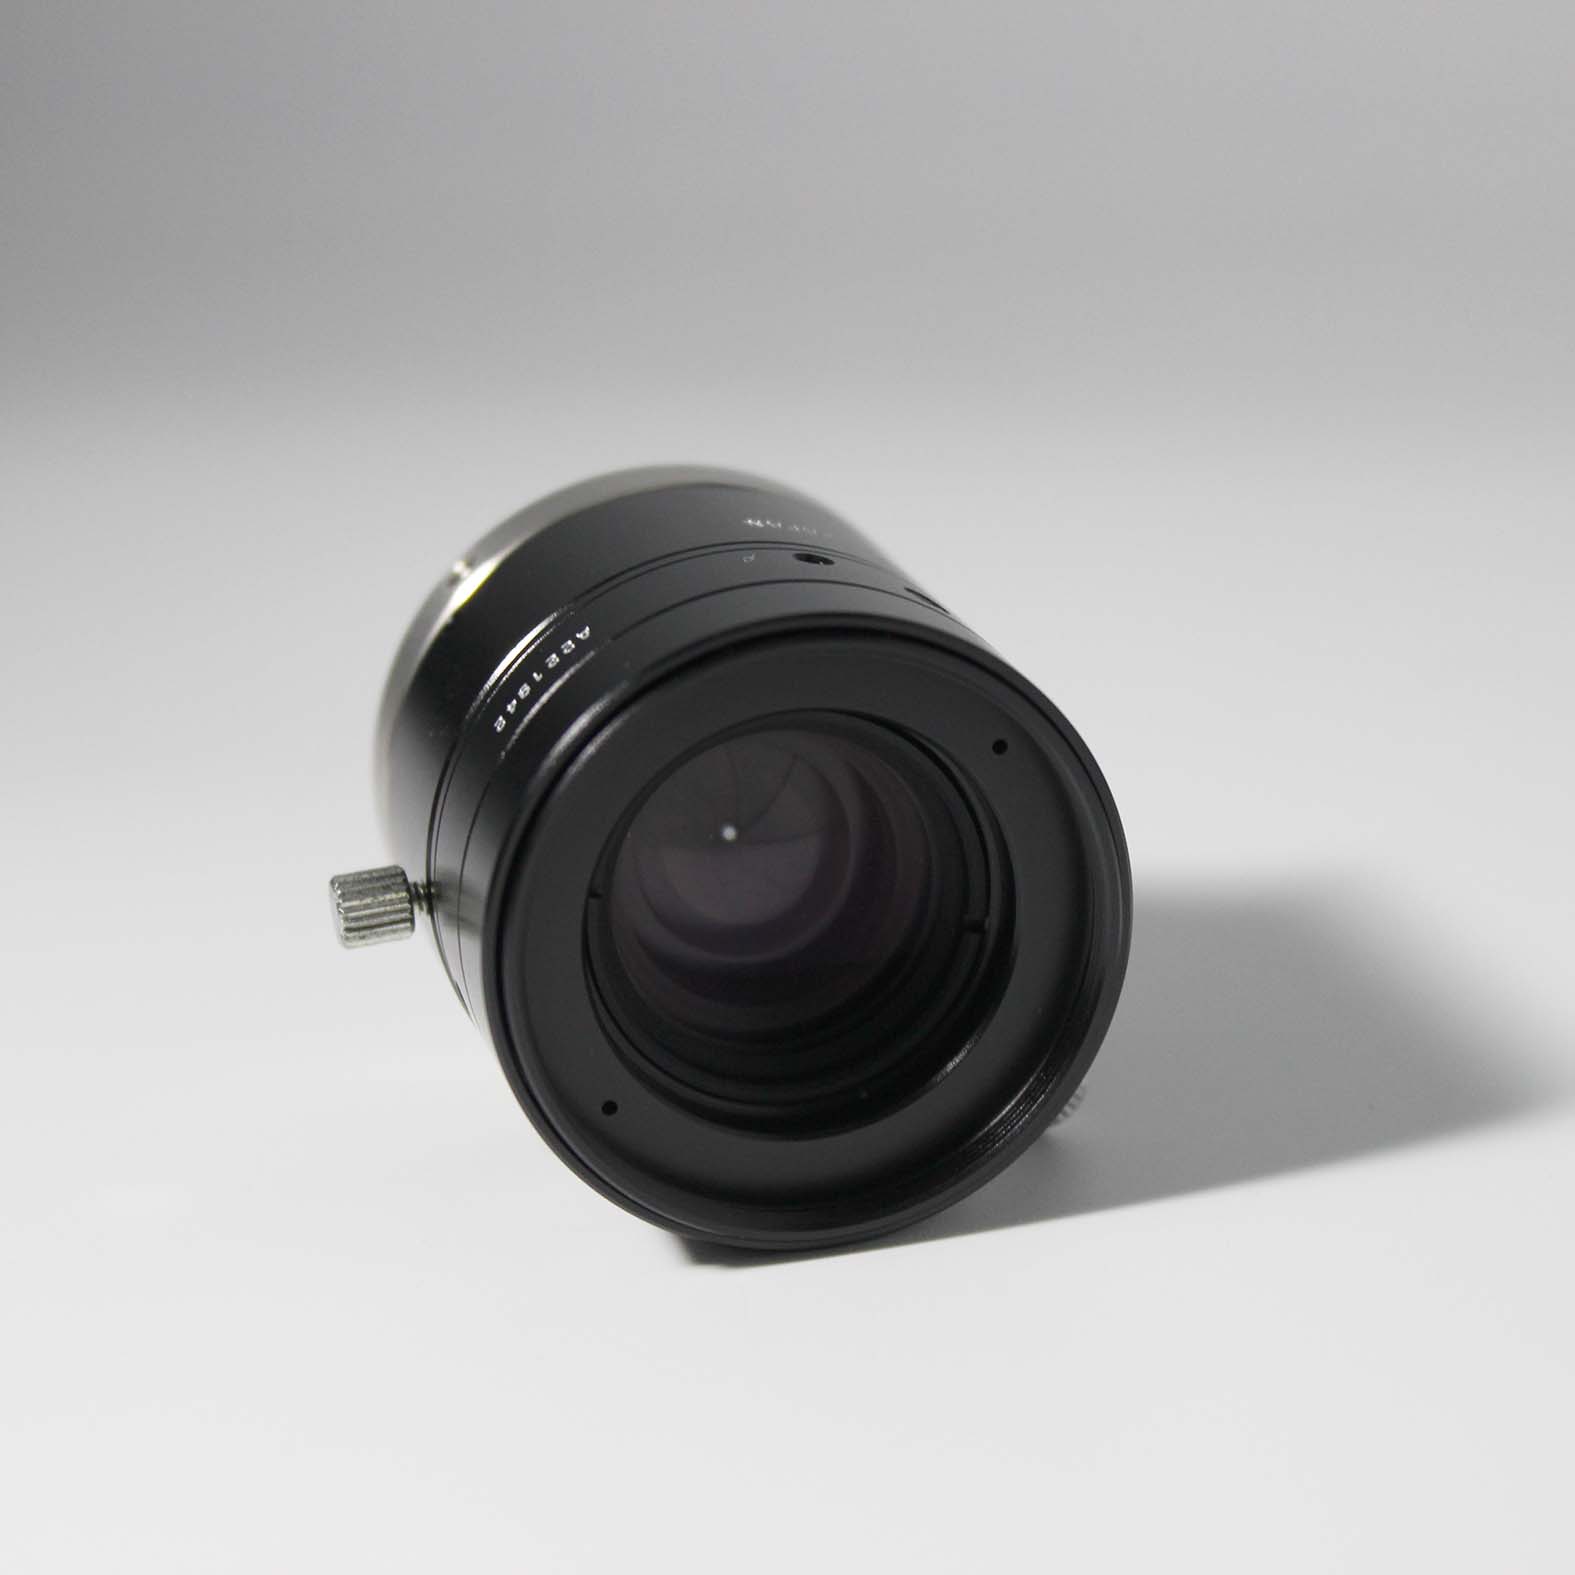 China Supplier Factory Prices 23FM16SP Camera Tamron Lens